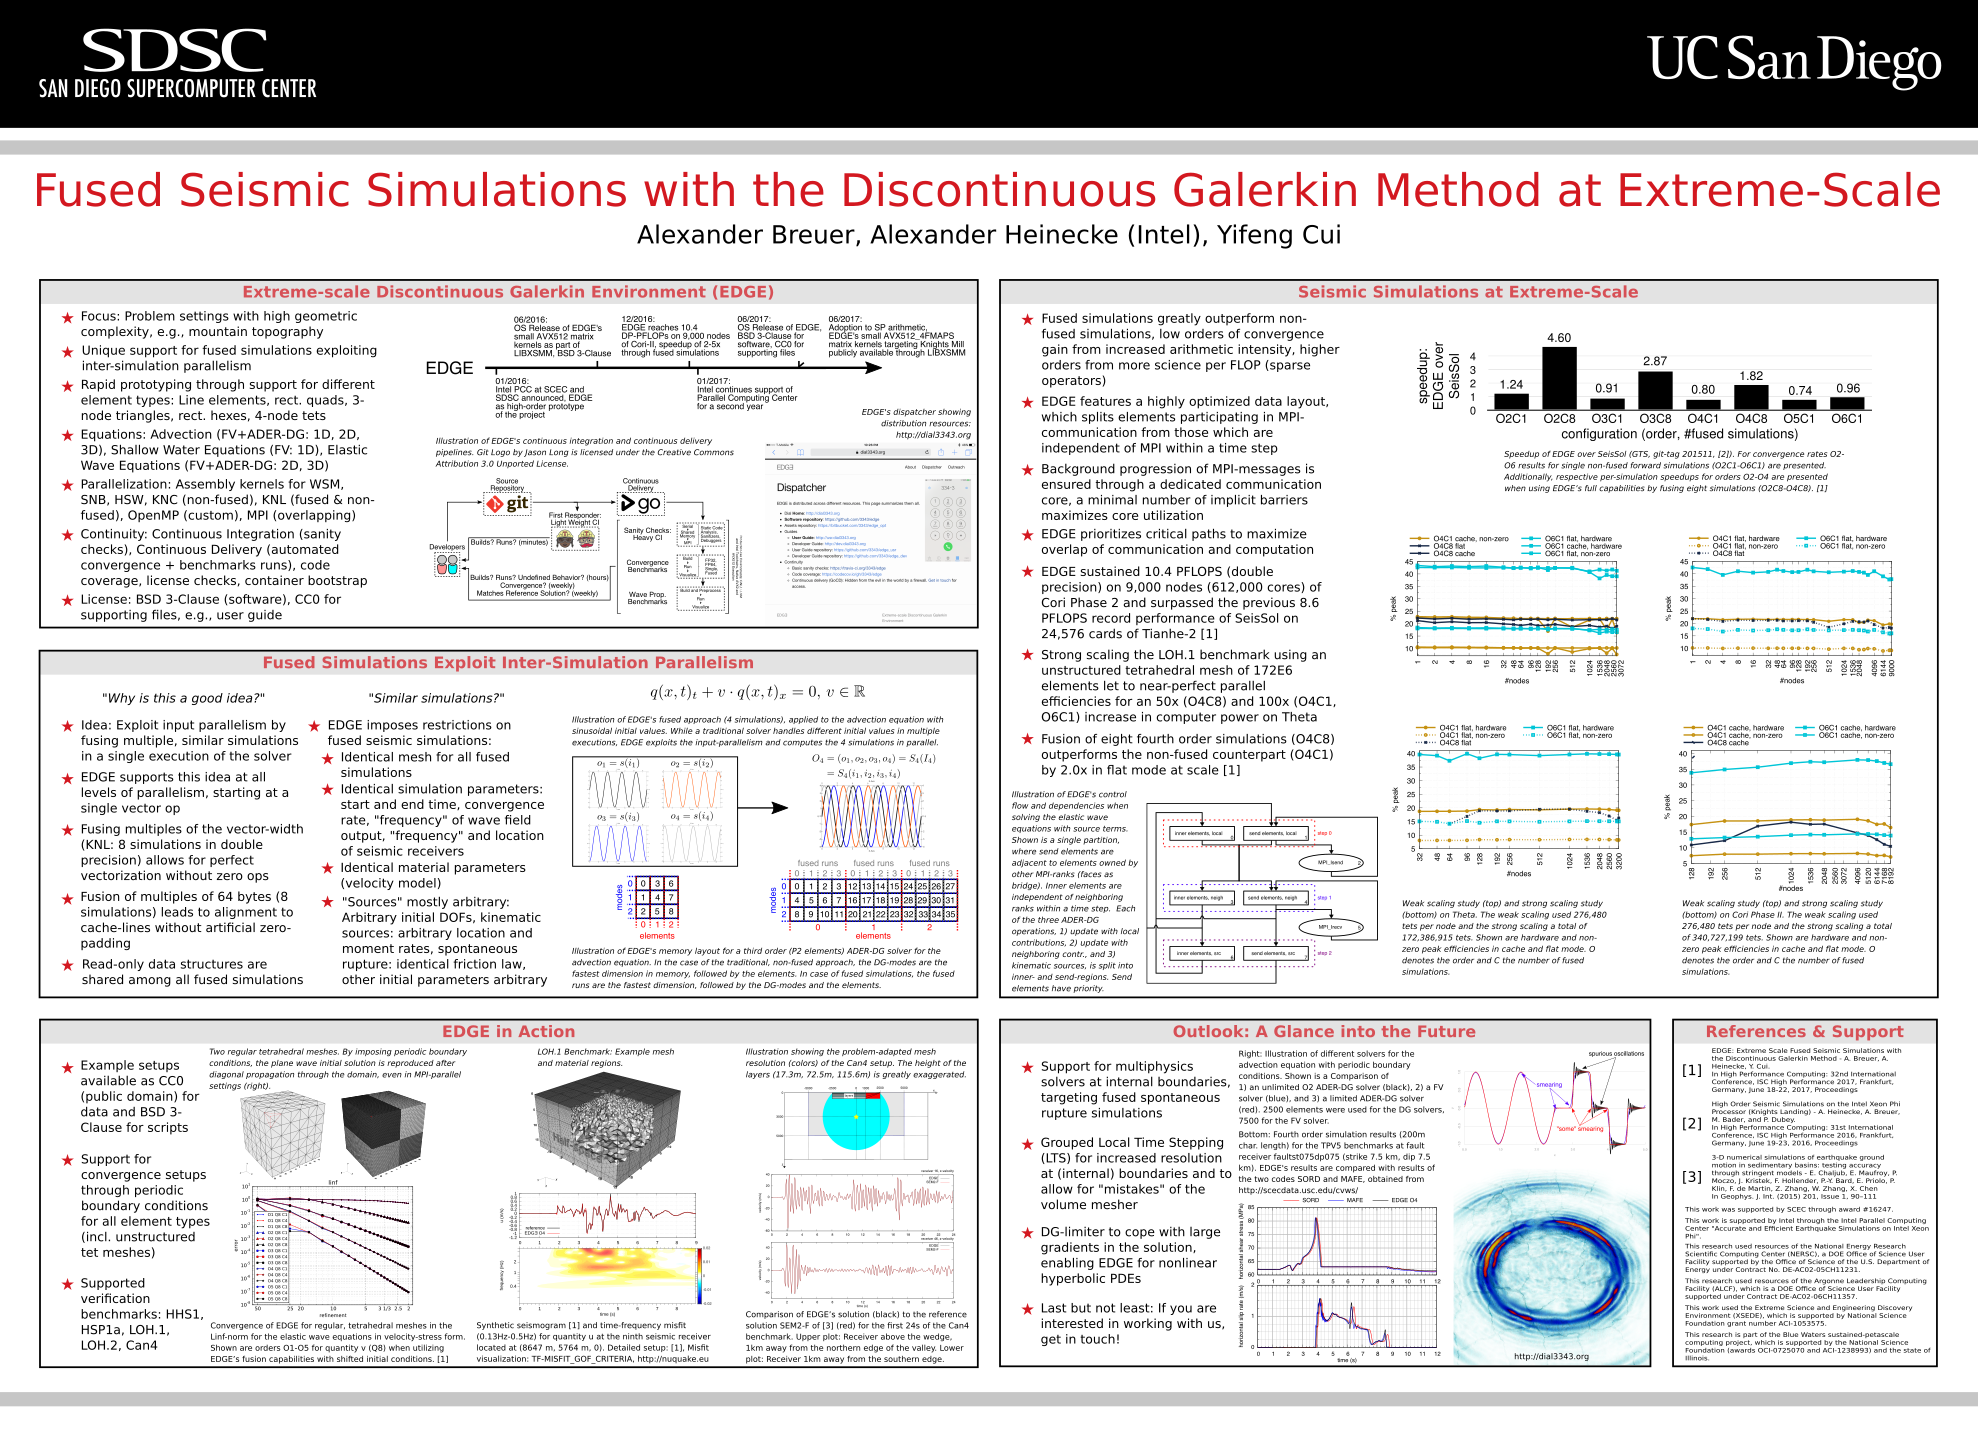 EDGE's poster at the 2017 SCEC Annual Meeting